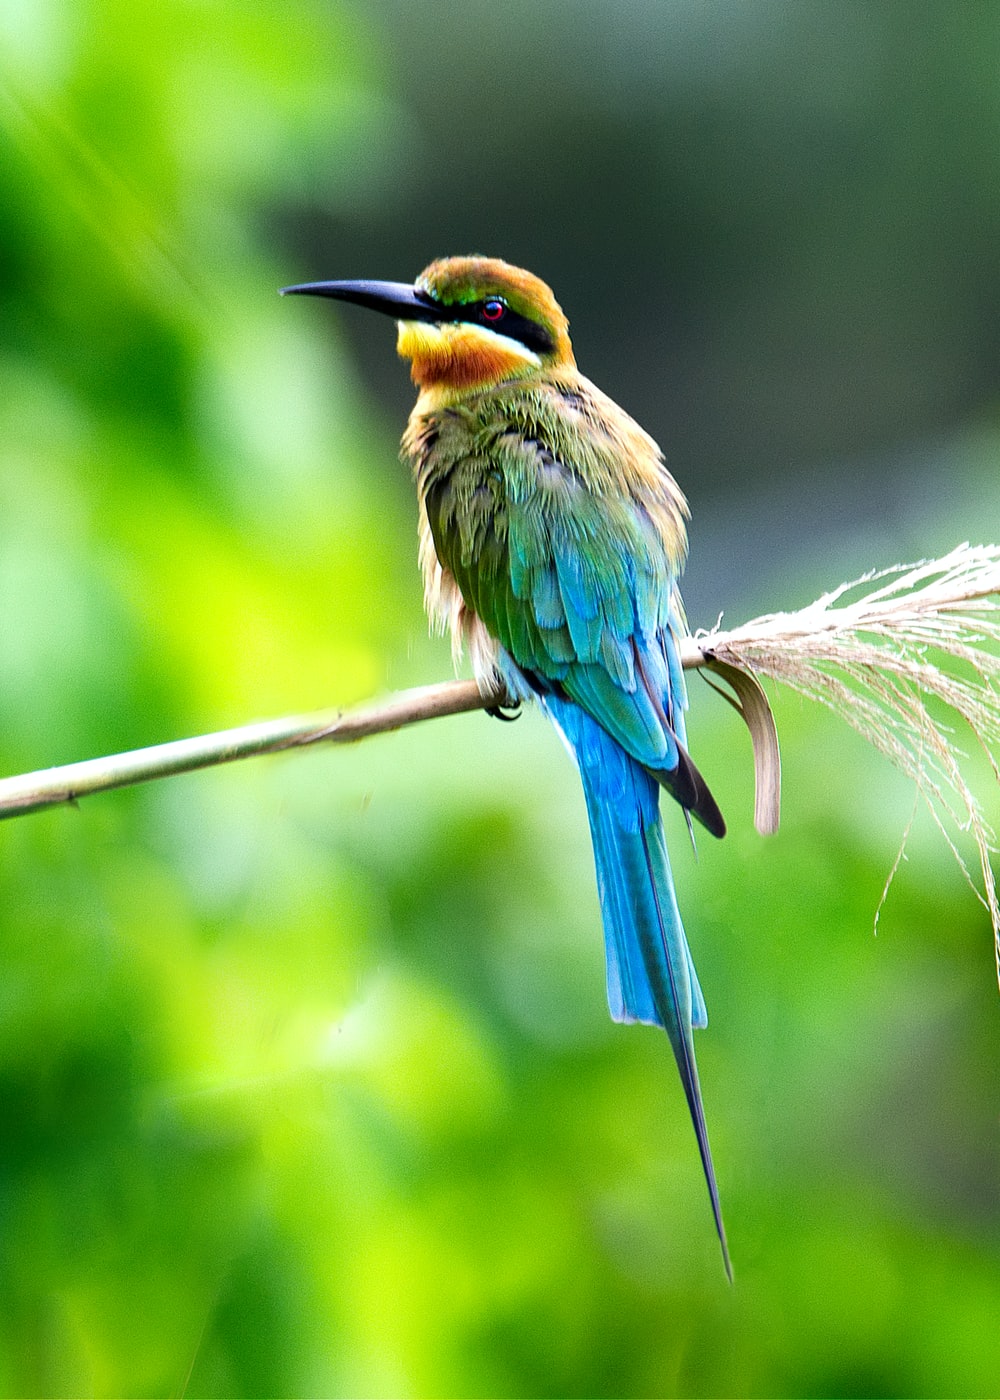 Colorful Bird Picture [HD]. Download Free Image